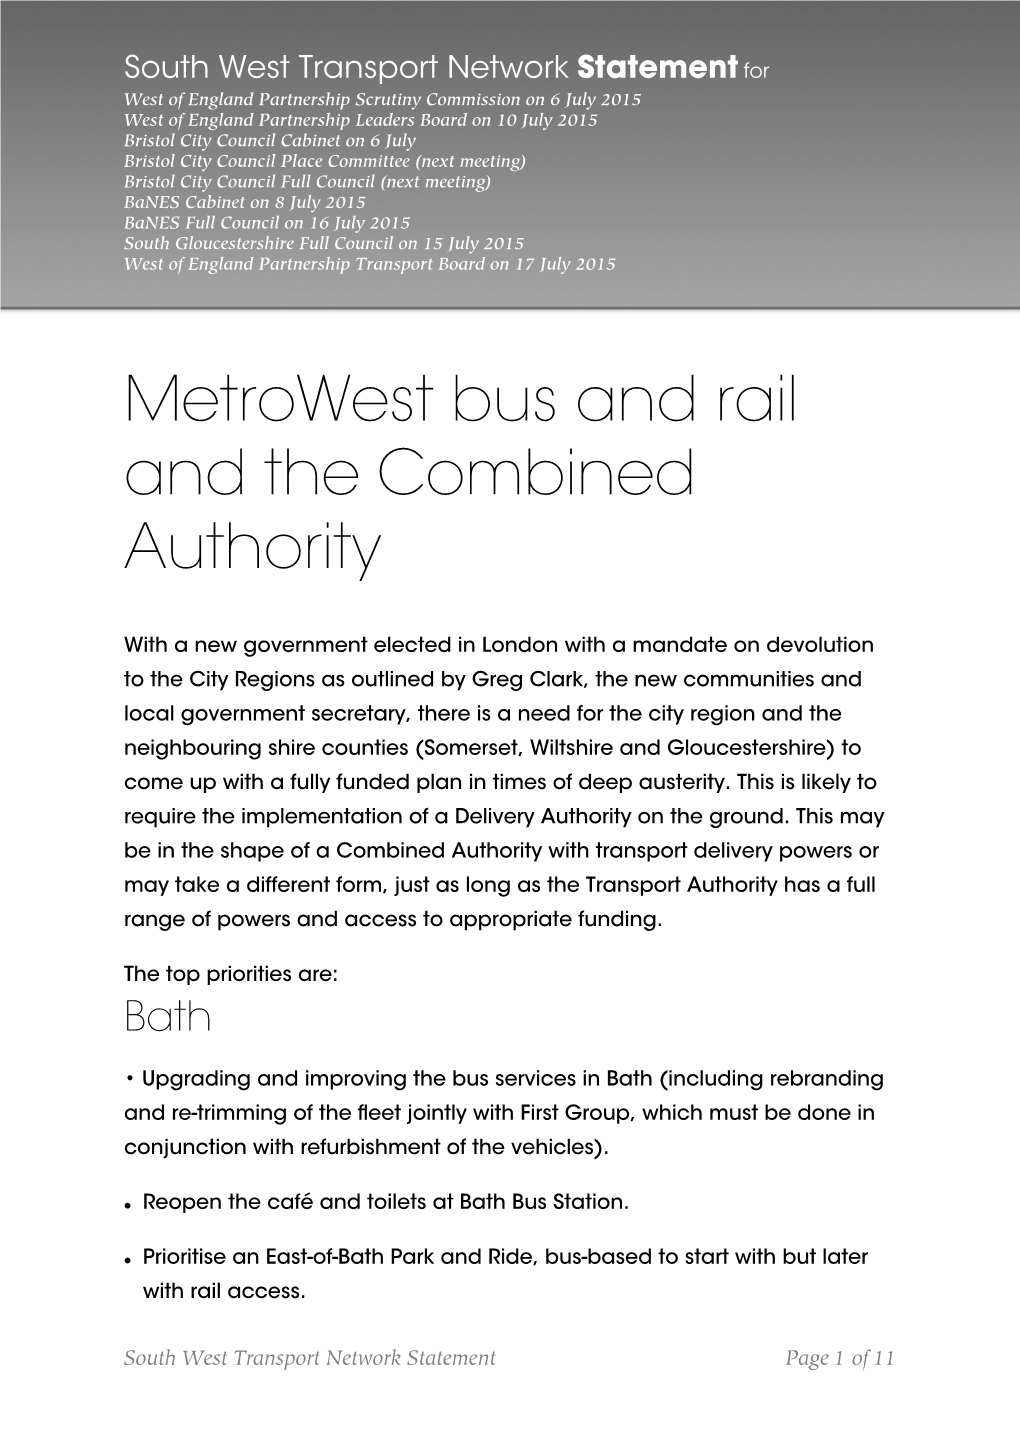 Metrowest and Combined Authority Revised